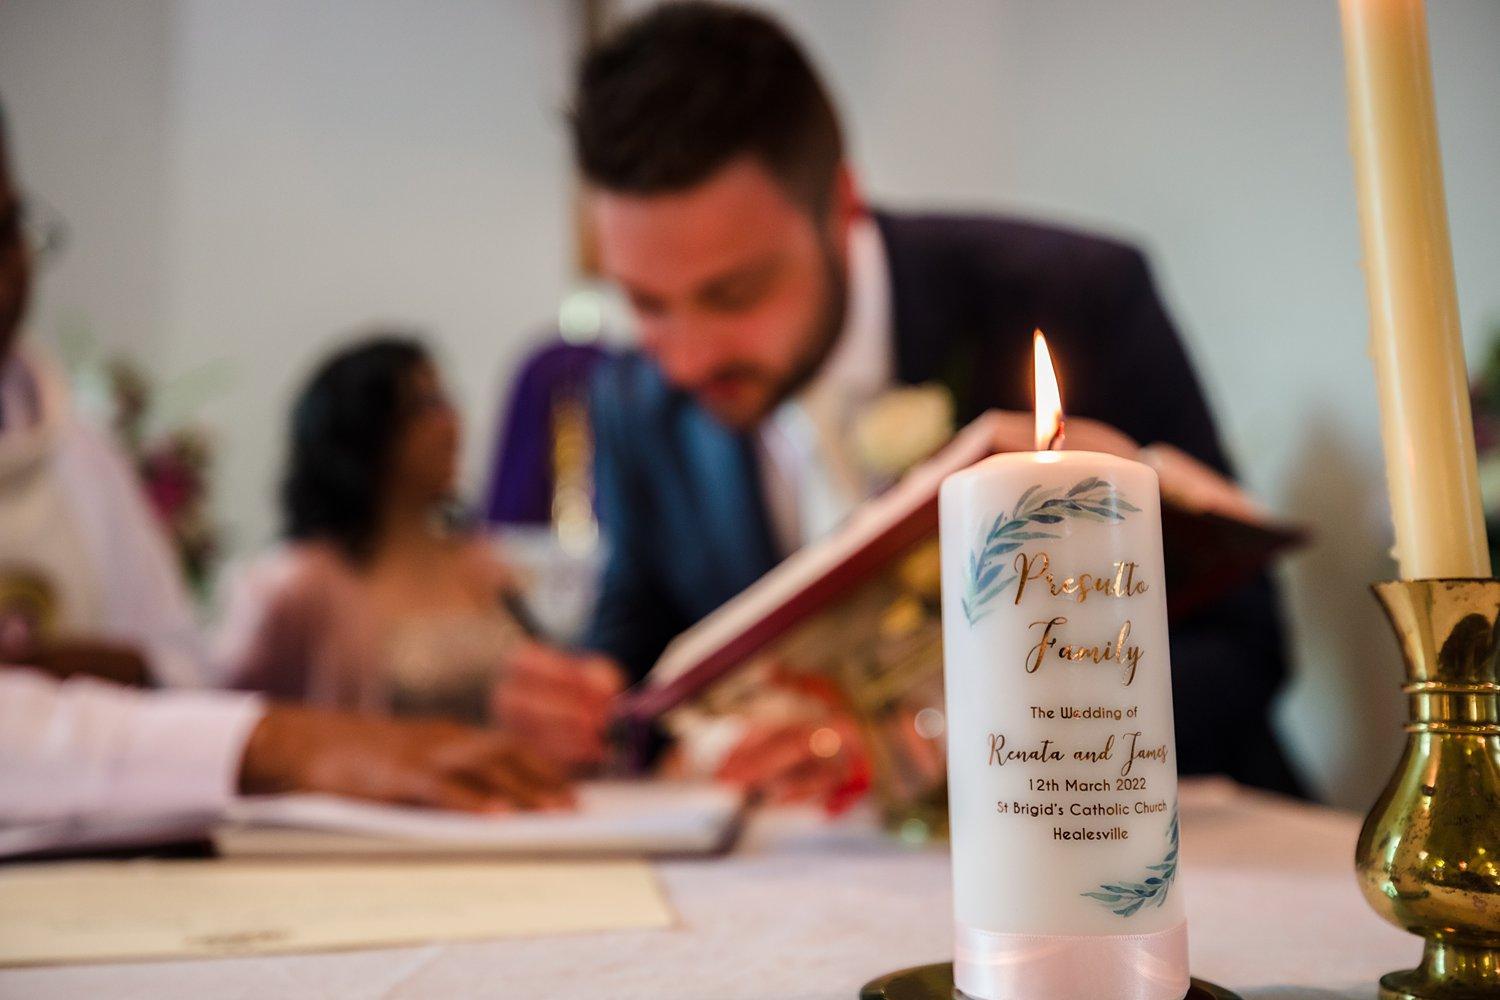 lit candle with the newly weds names and wedding dateon it